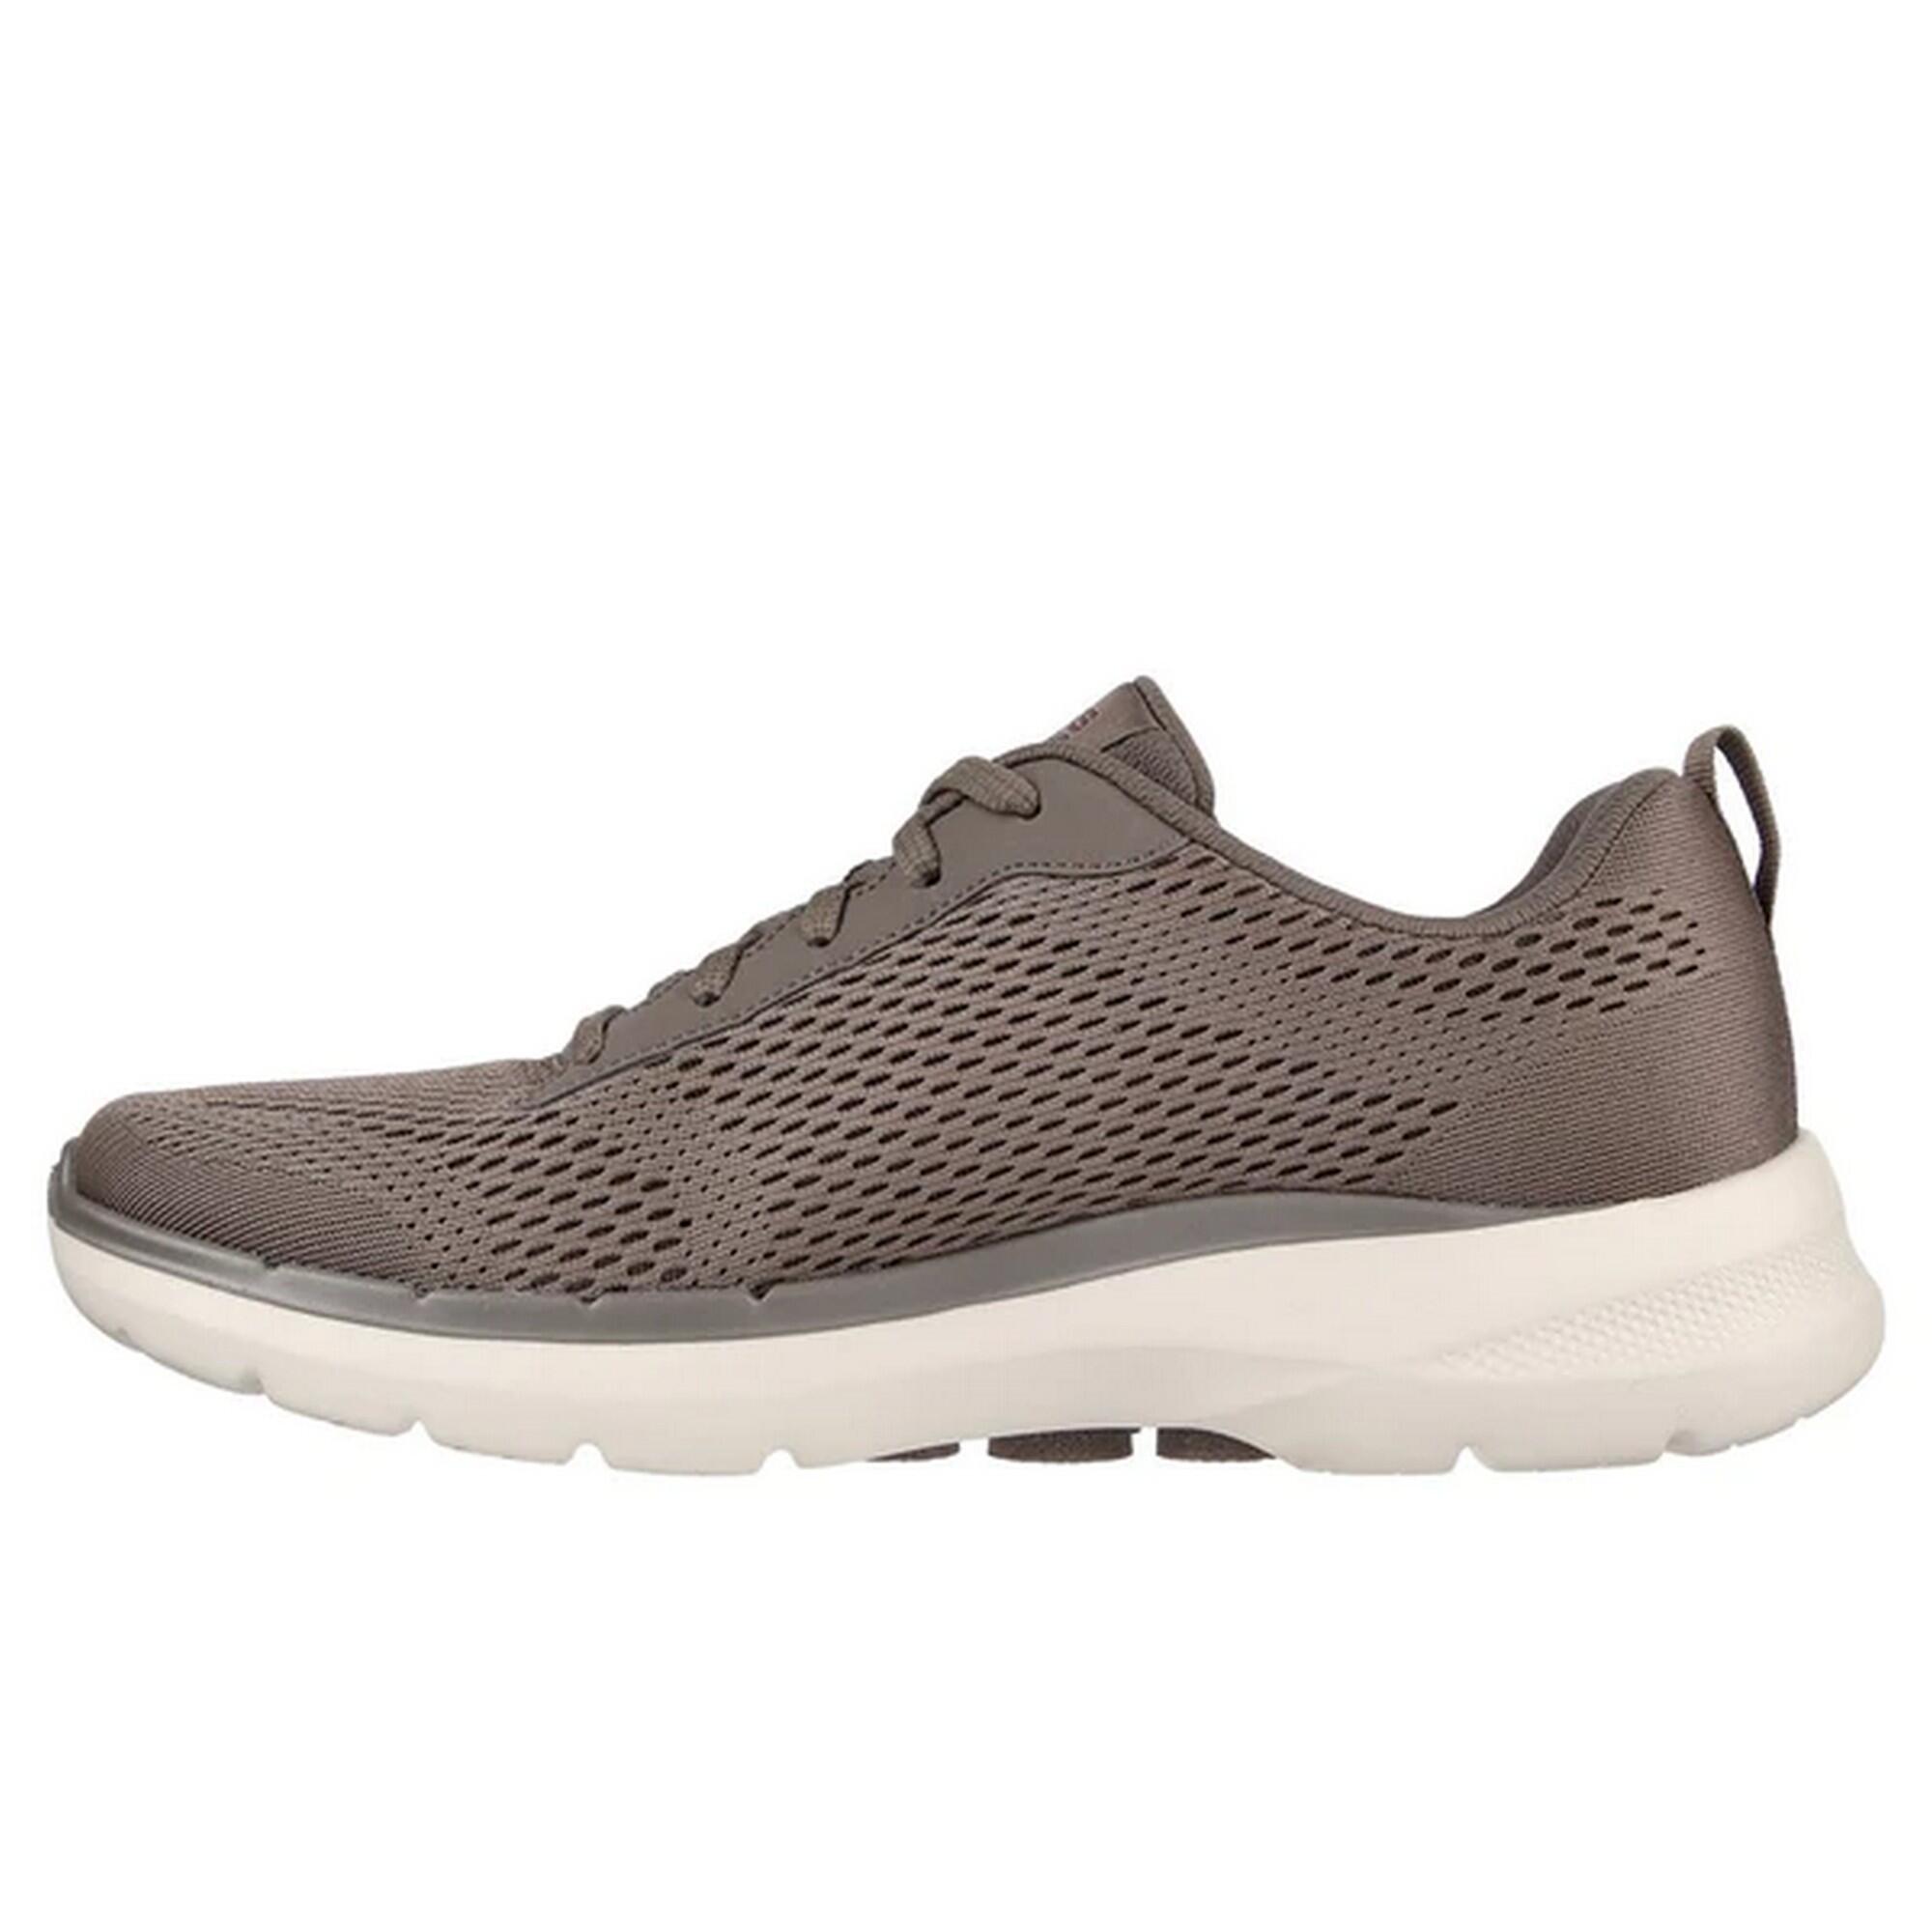 Mens Go Walk 6 Avalo Trainers (Taupe) 2/5